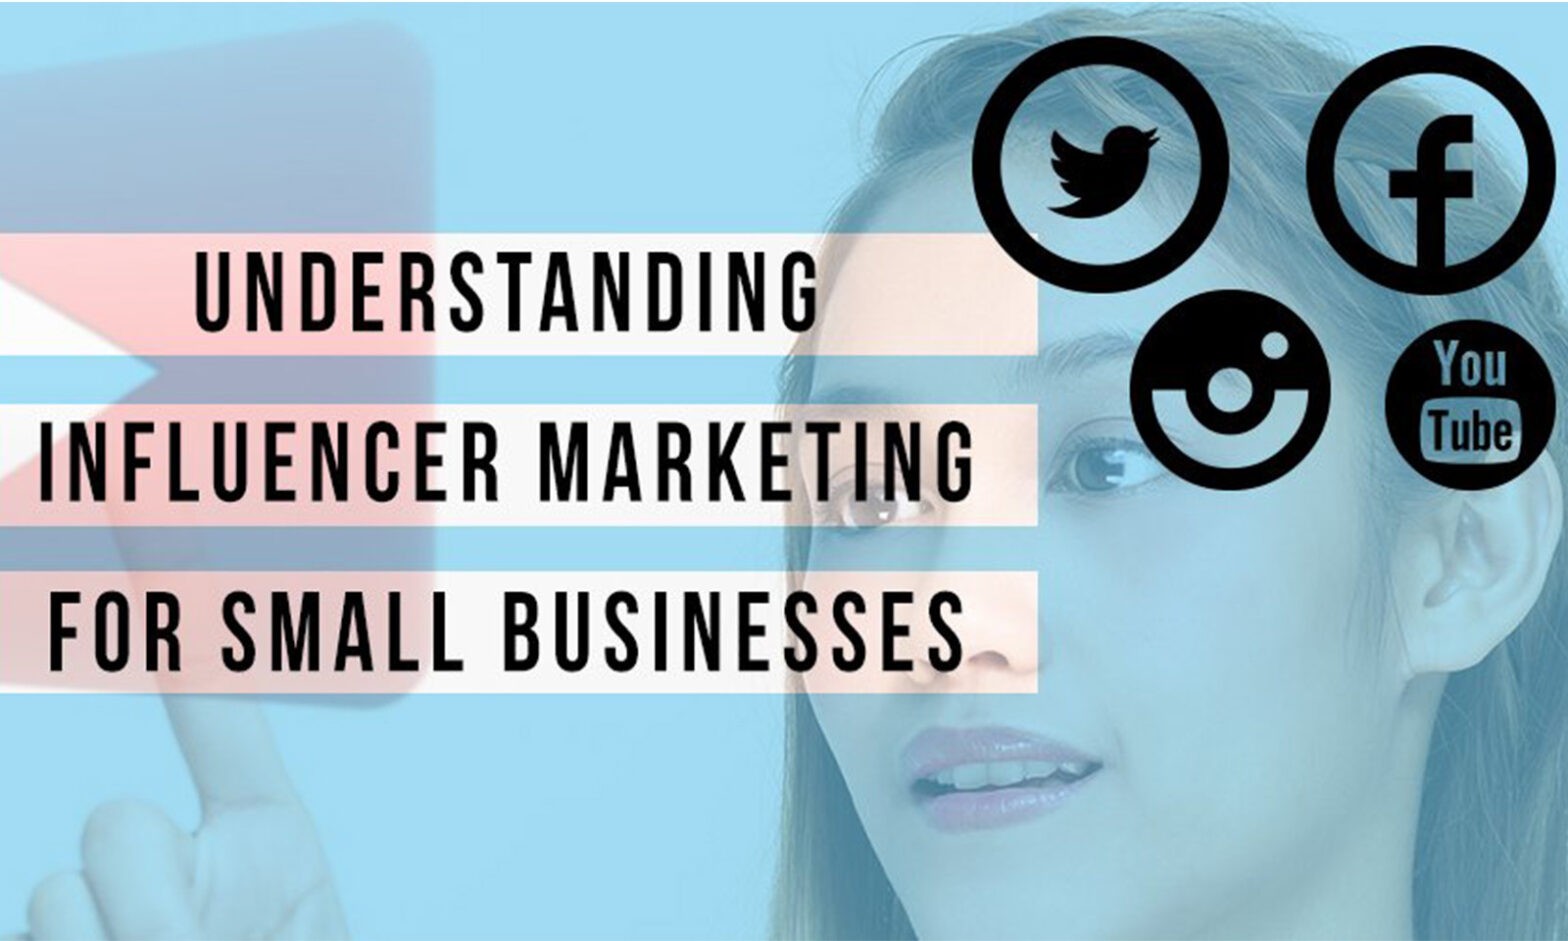 Featured image for post: Understanding Influencer Marketing for Small Businesses